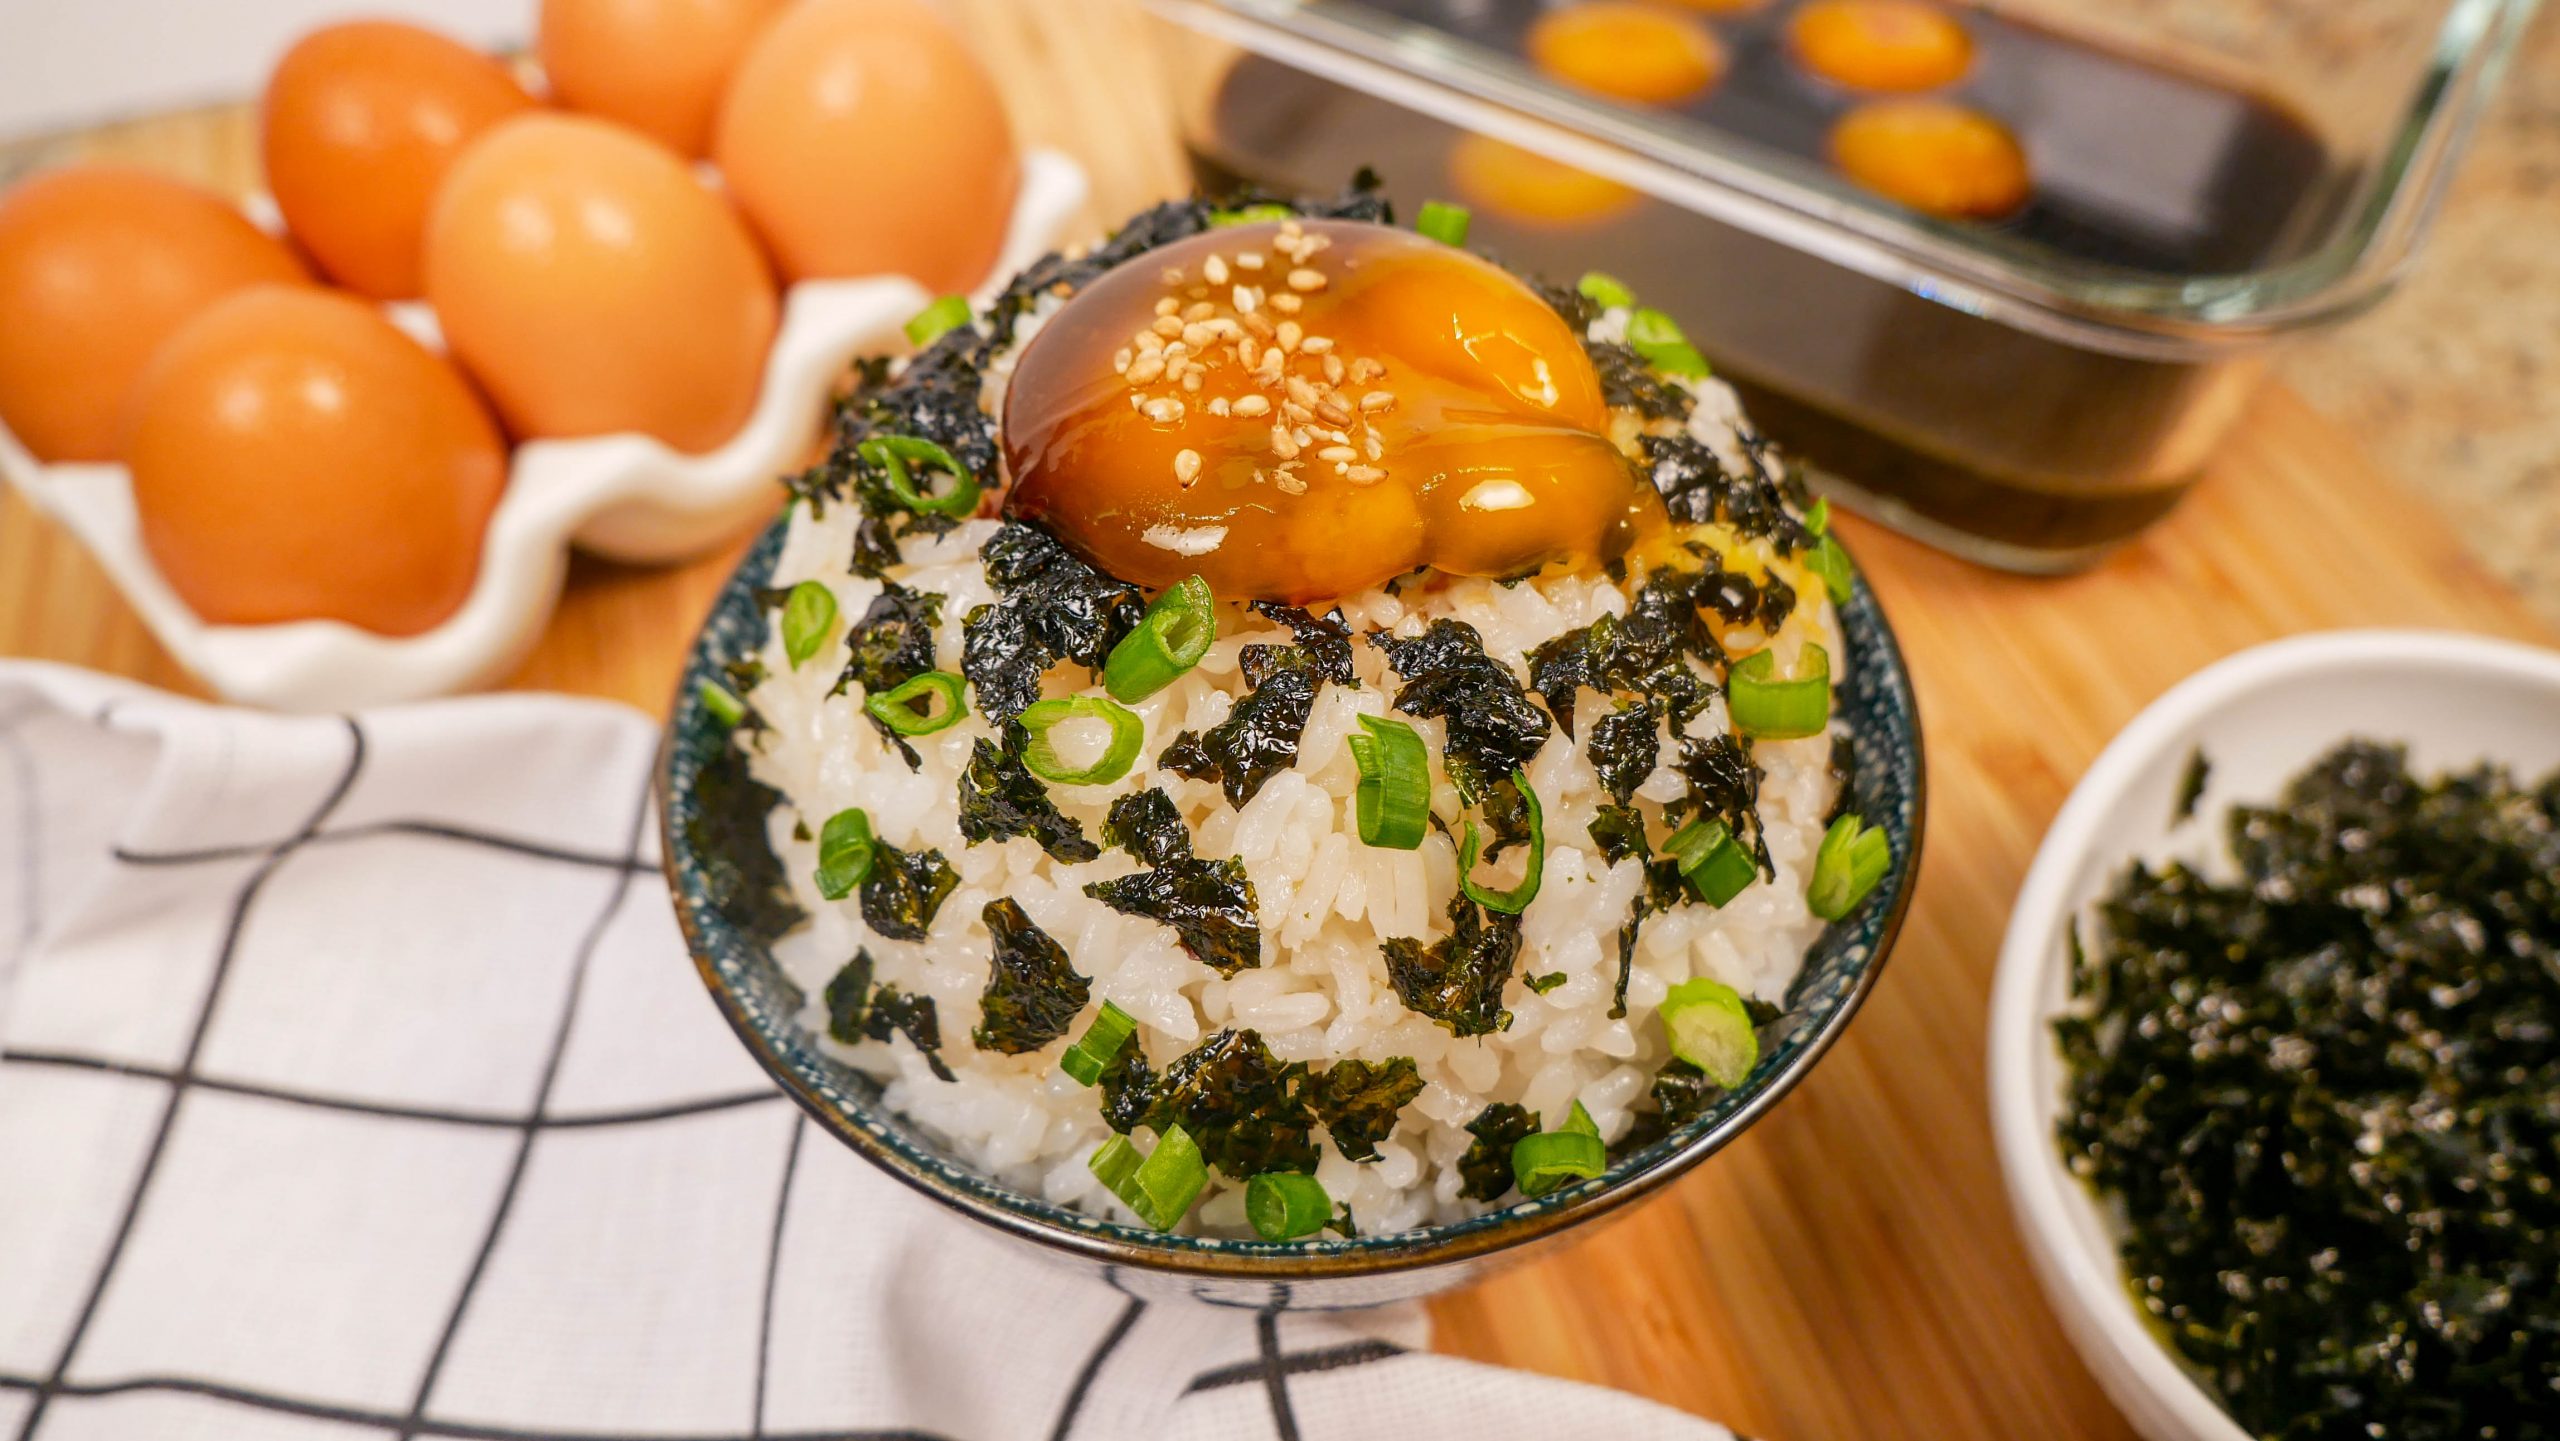 soy cured egg yolks on top of a bed of rice with scallions and nori seaweed